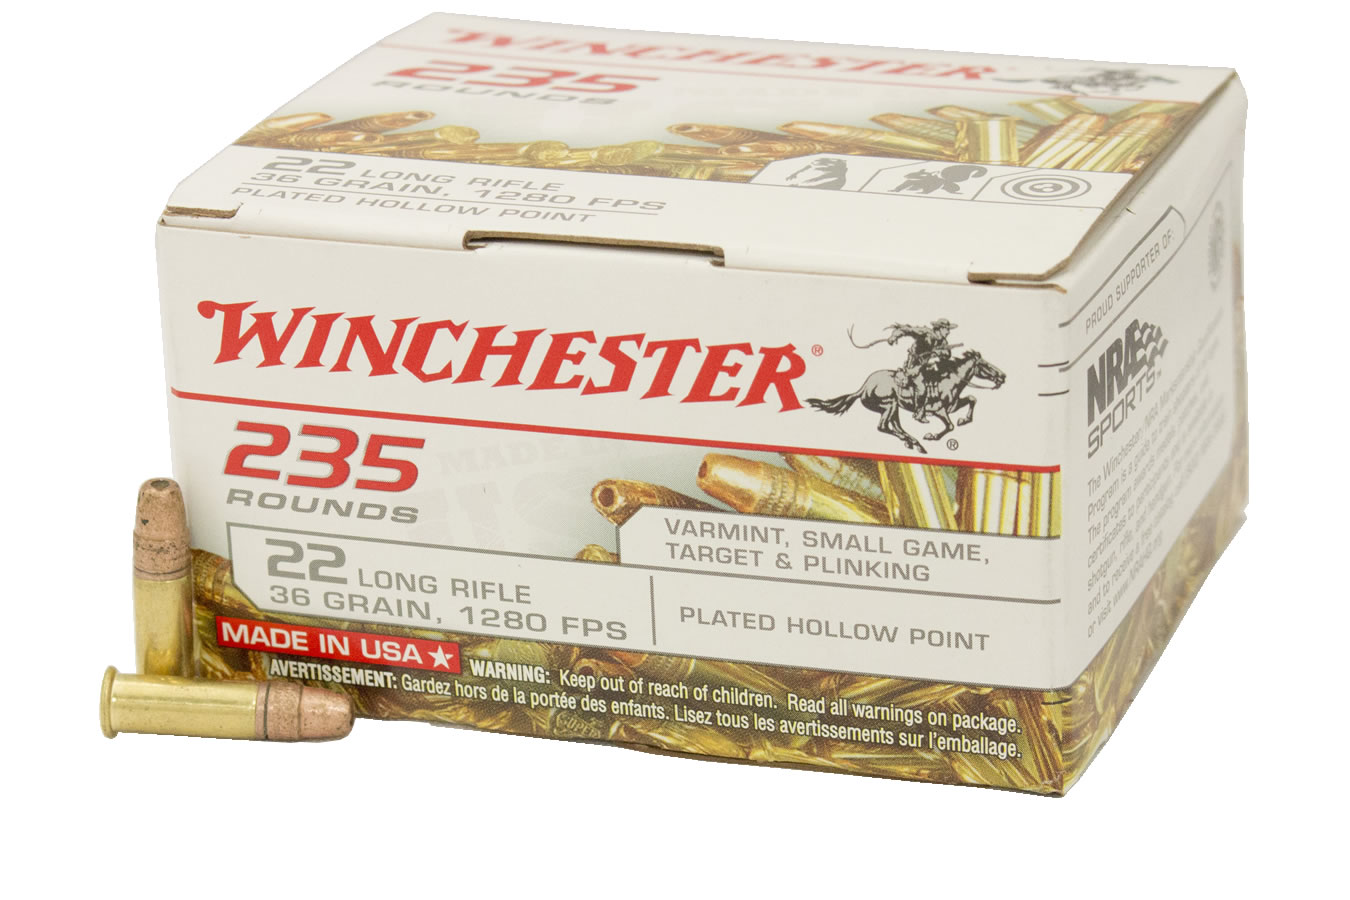 WINCHESTER AMMO 22 LR 36 GR CPHP 235 RDS